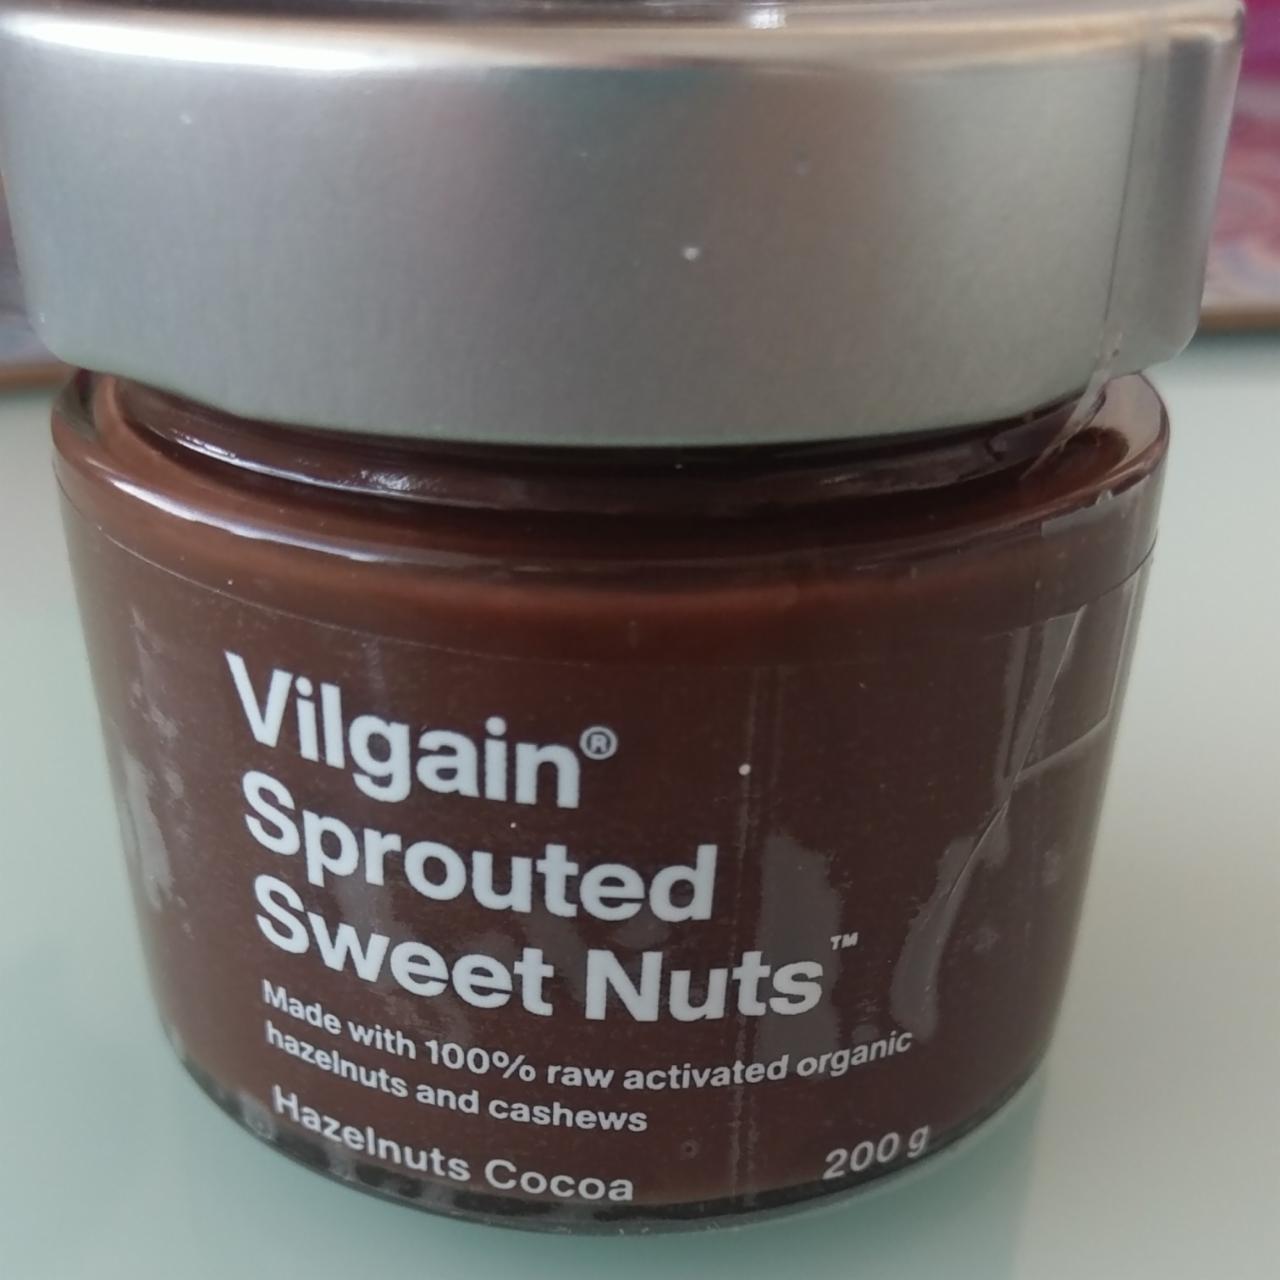 Fotografie - Sprouted Sweet Nuts Vilgain